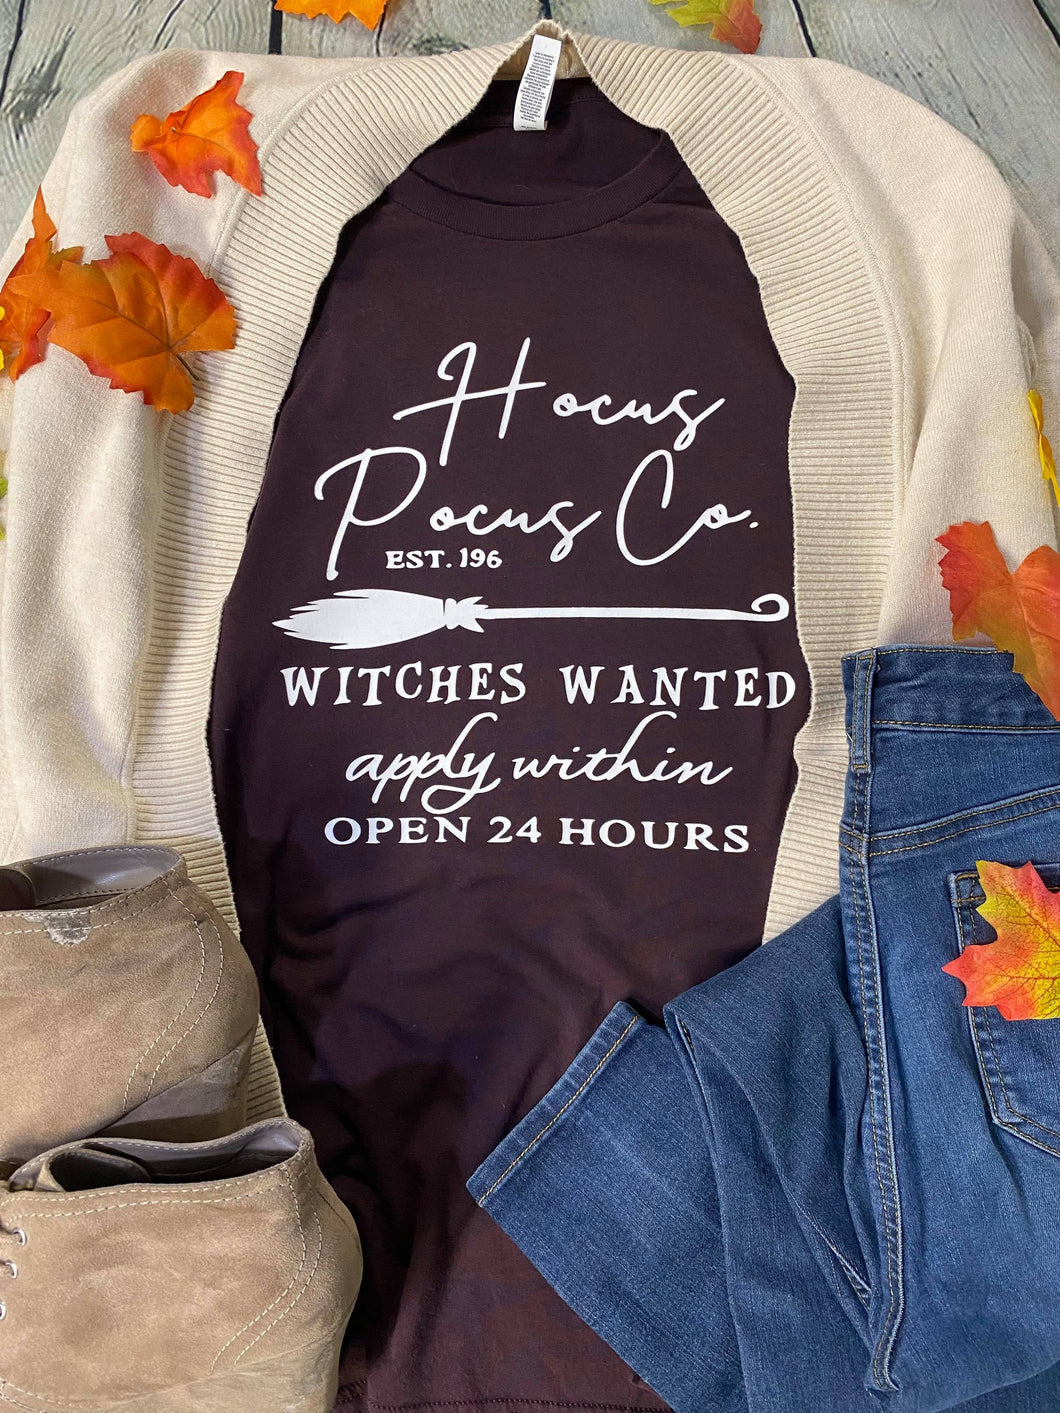 Hocus pocus witches wanted apparel